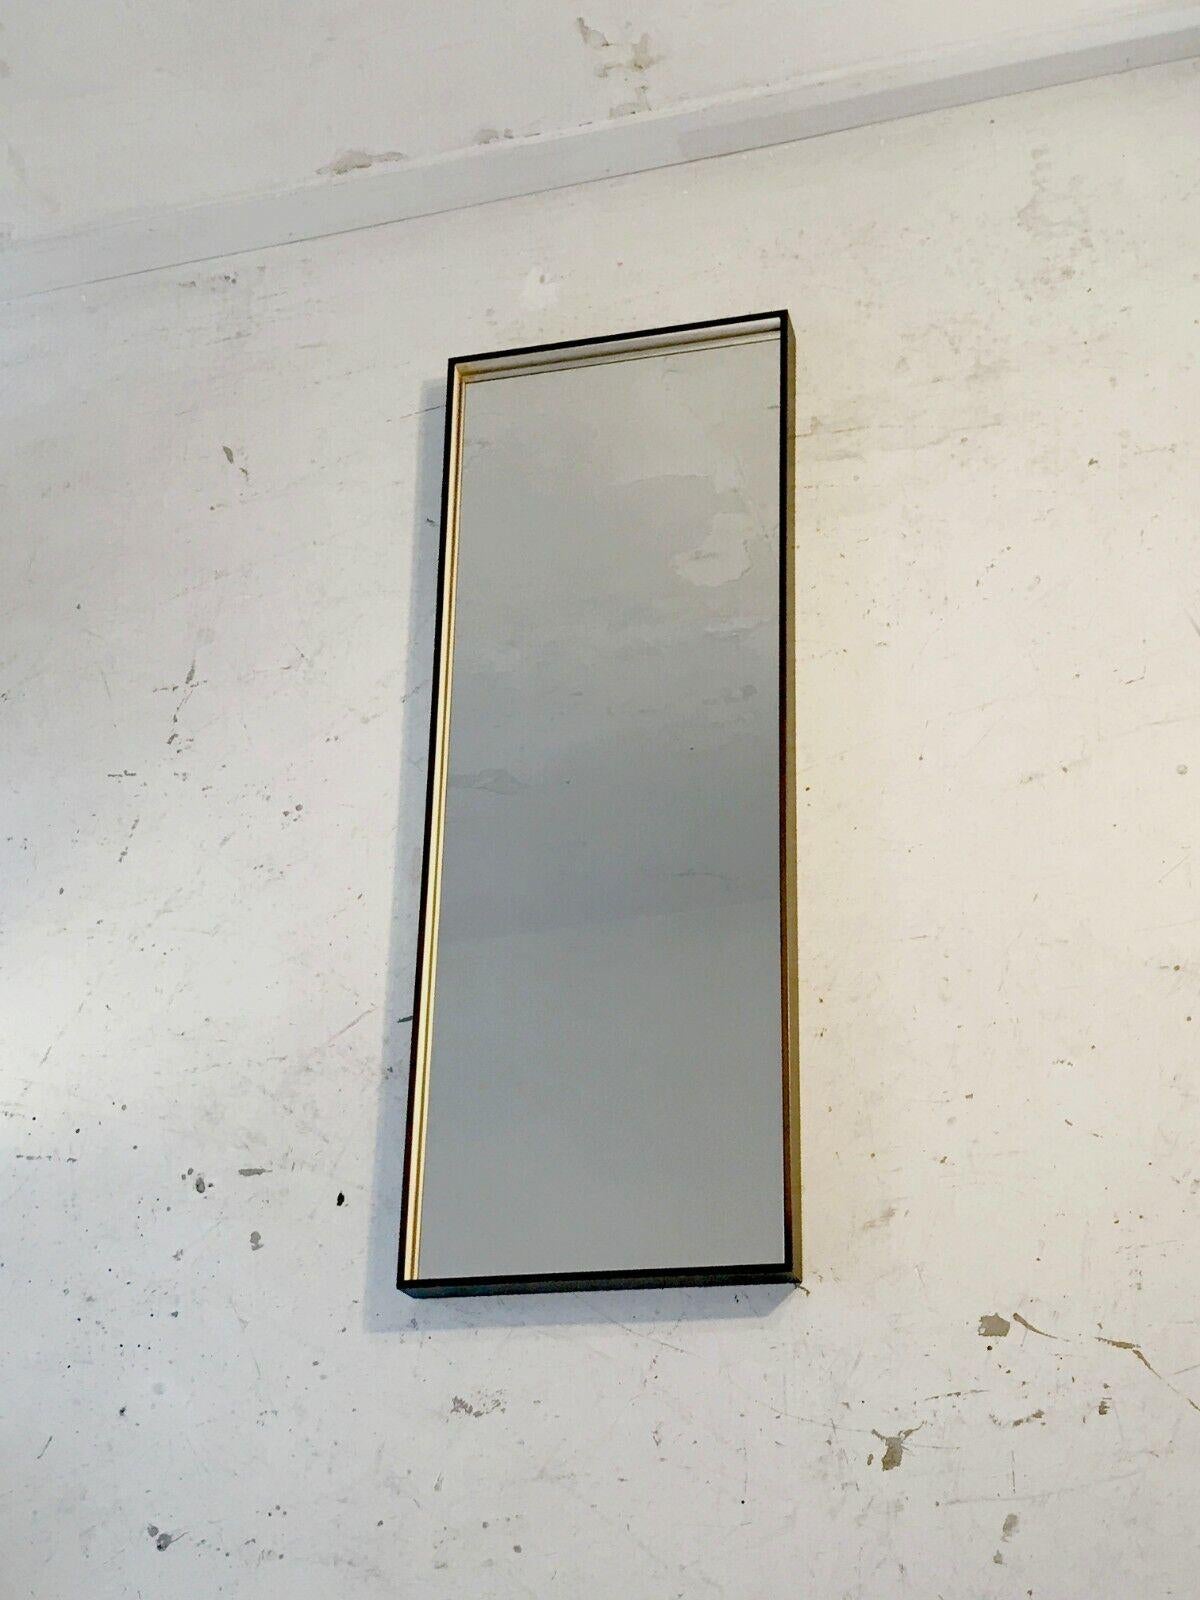 An elegant rectangular wall mirror, Art-Deco, Post-Modernist, Bauhaus, Constructivist, with an offset rectangular frame in American box style in bronze inlaid wood with a gunmetal patina, to be attributed, France 1990.
This mirror can be arranged